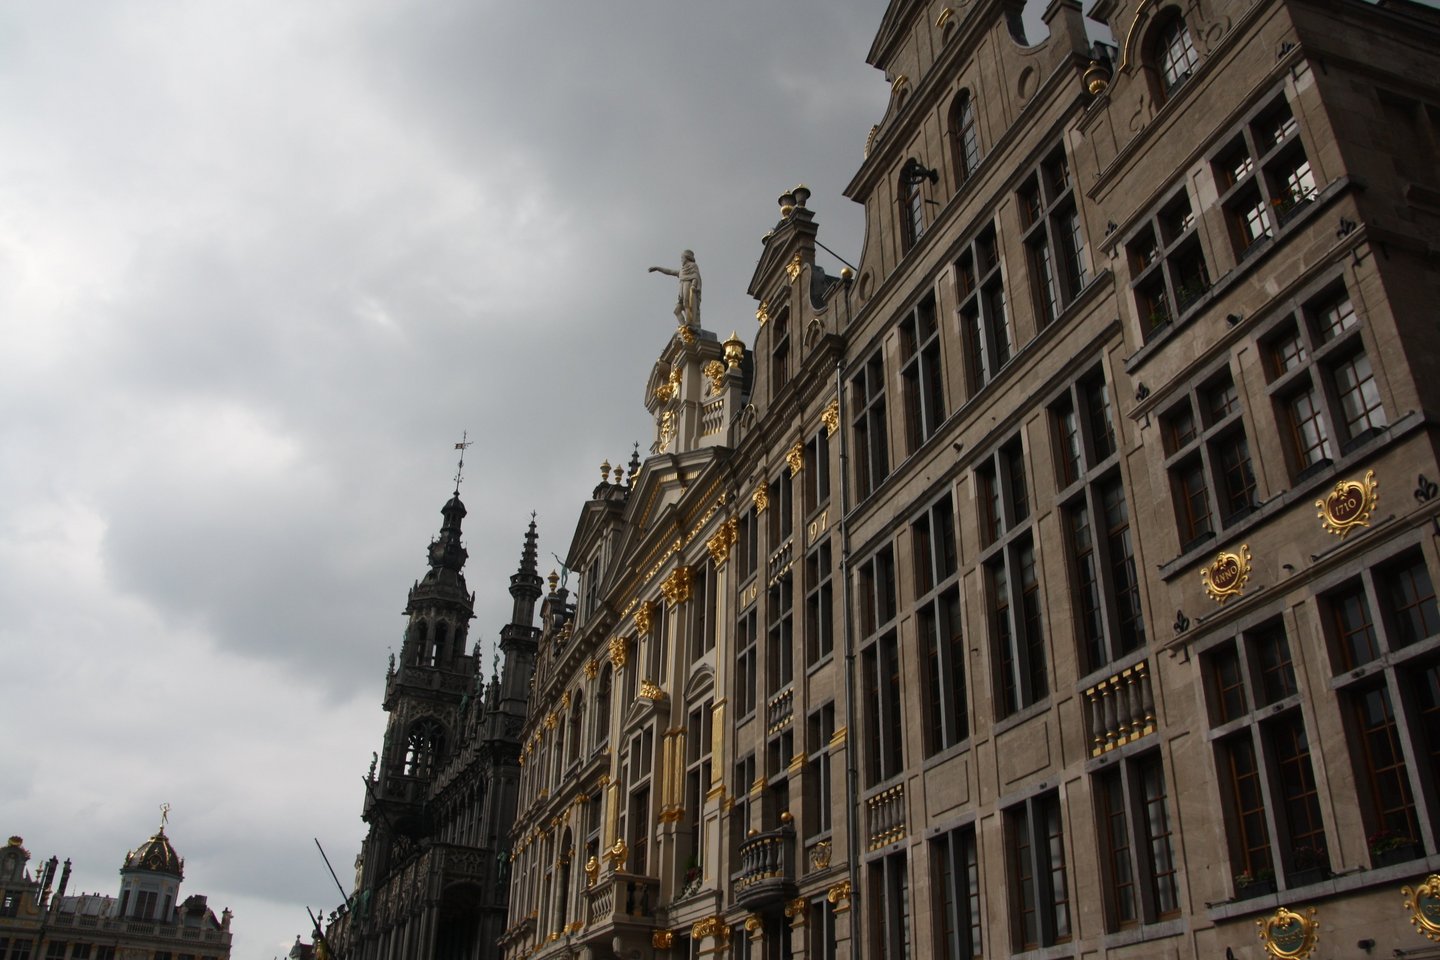 Building at the Grand Place with golden ornamentation on the outside.